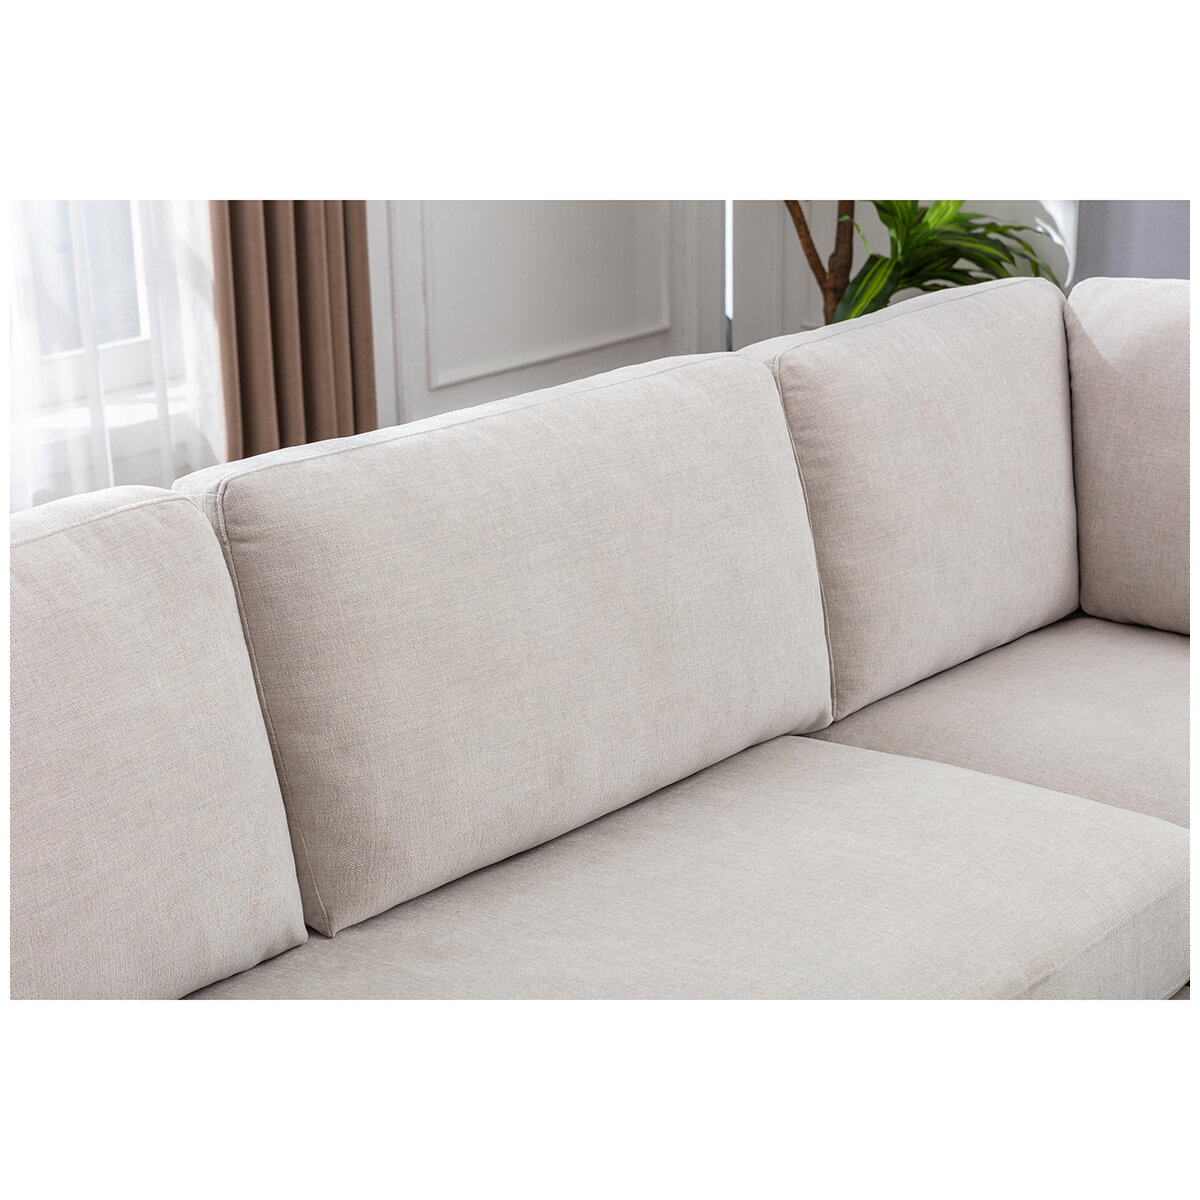 Zoy Monroe 2 Piece Stationary Fabric Chaise Sectional, White